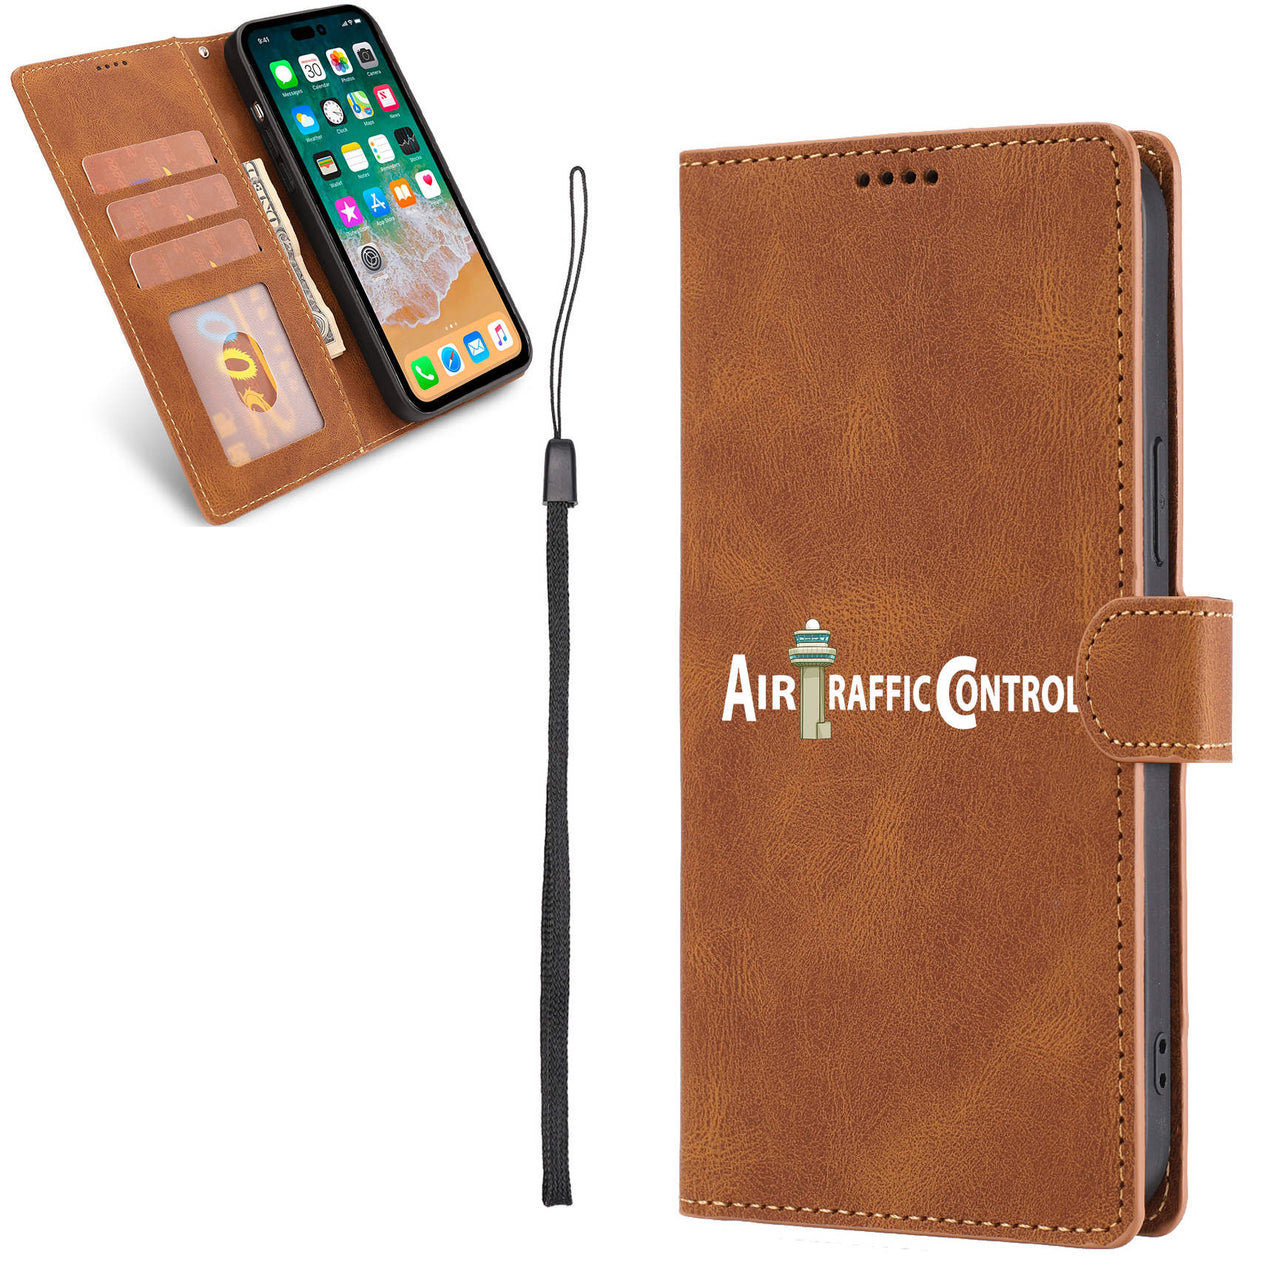 Air Traffic Control Designed Leather iPhone Cases